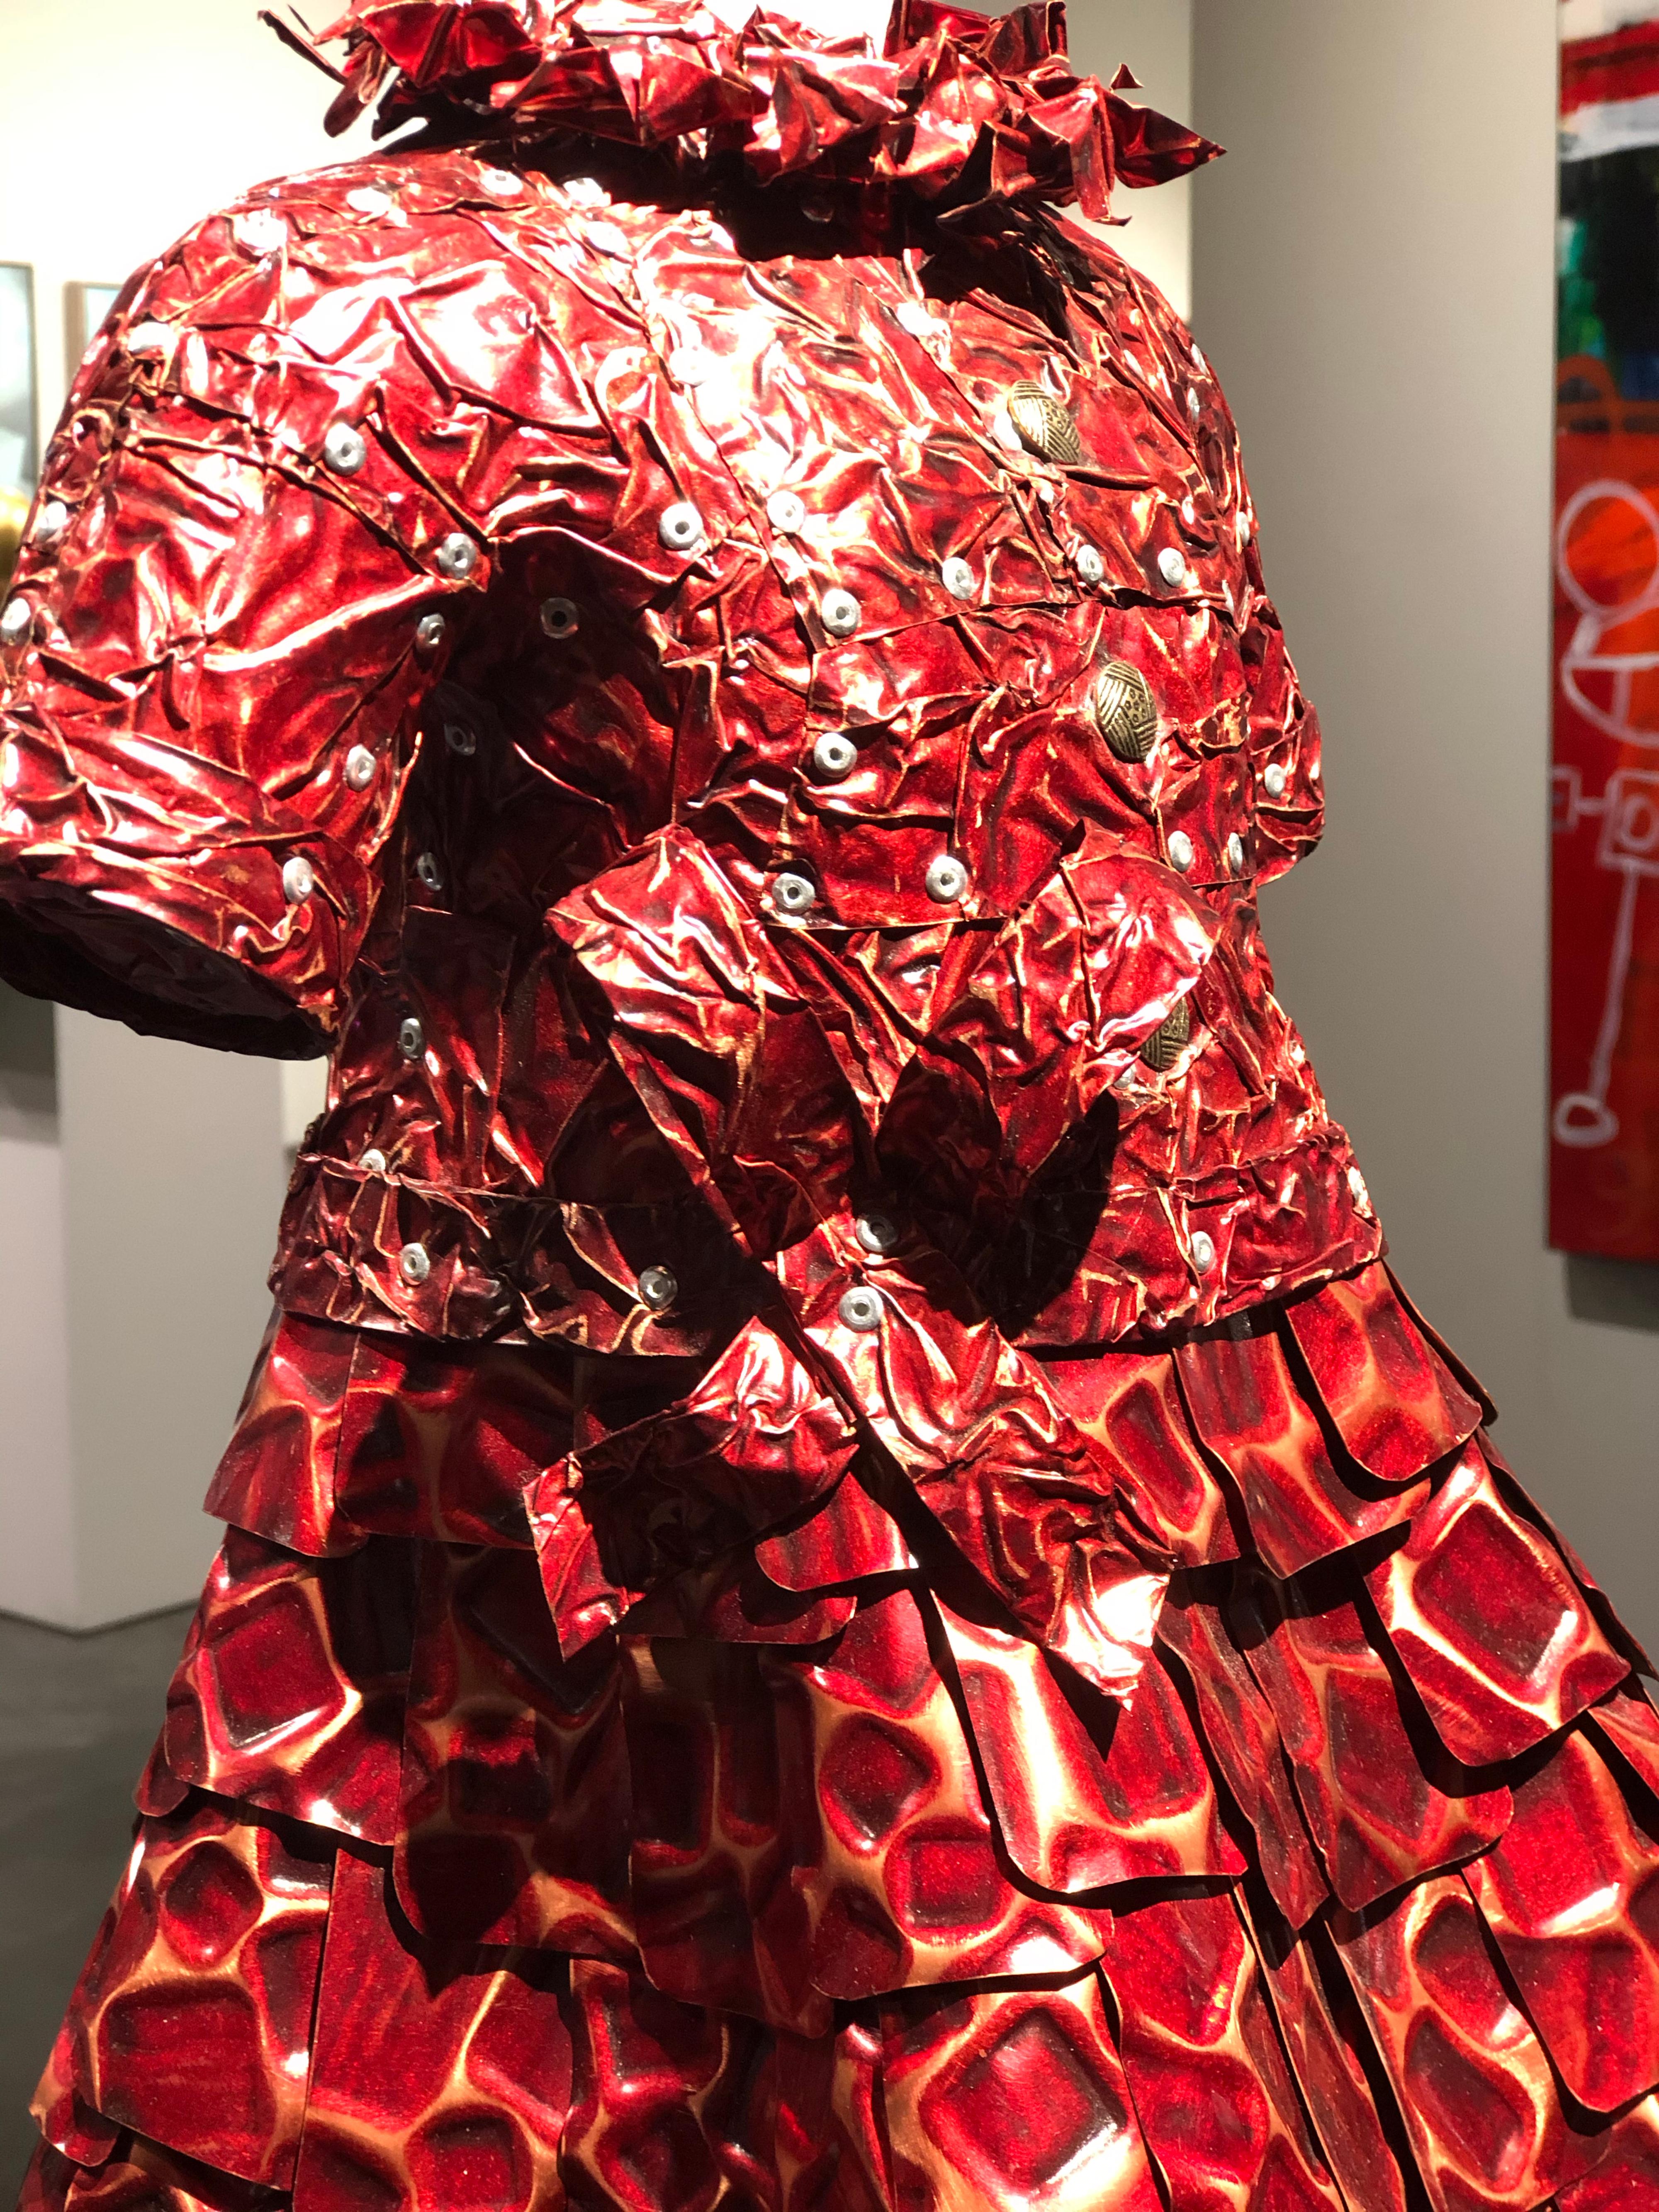 'Lina' Mixed Media, Found Object Sculpture of a Red Dress 3